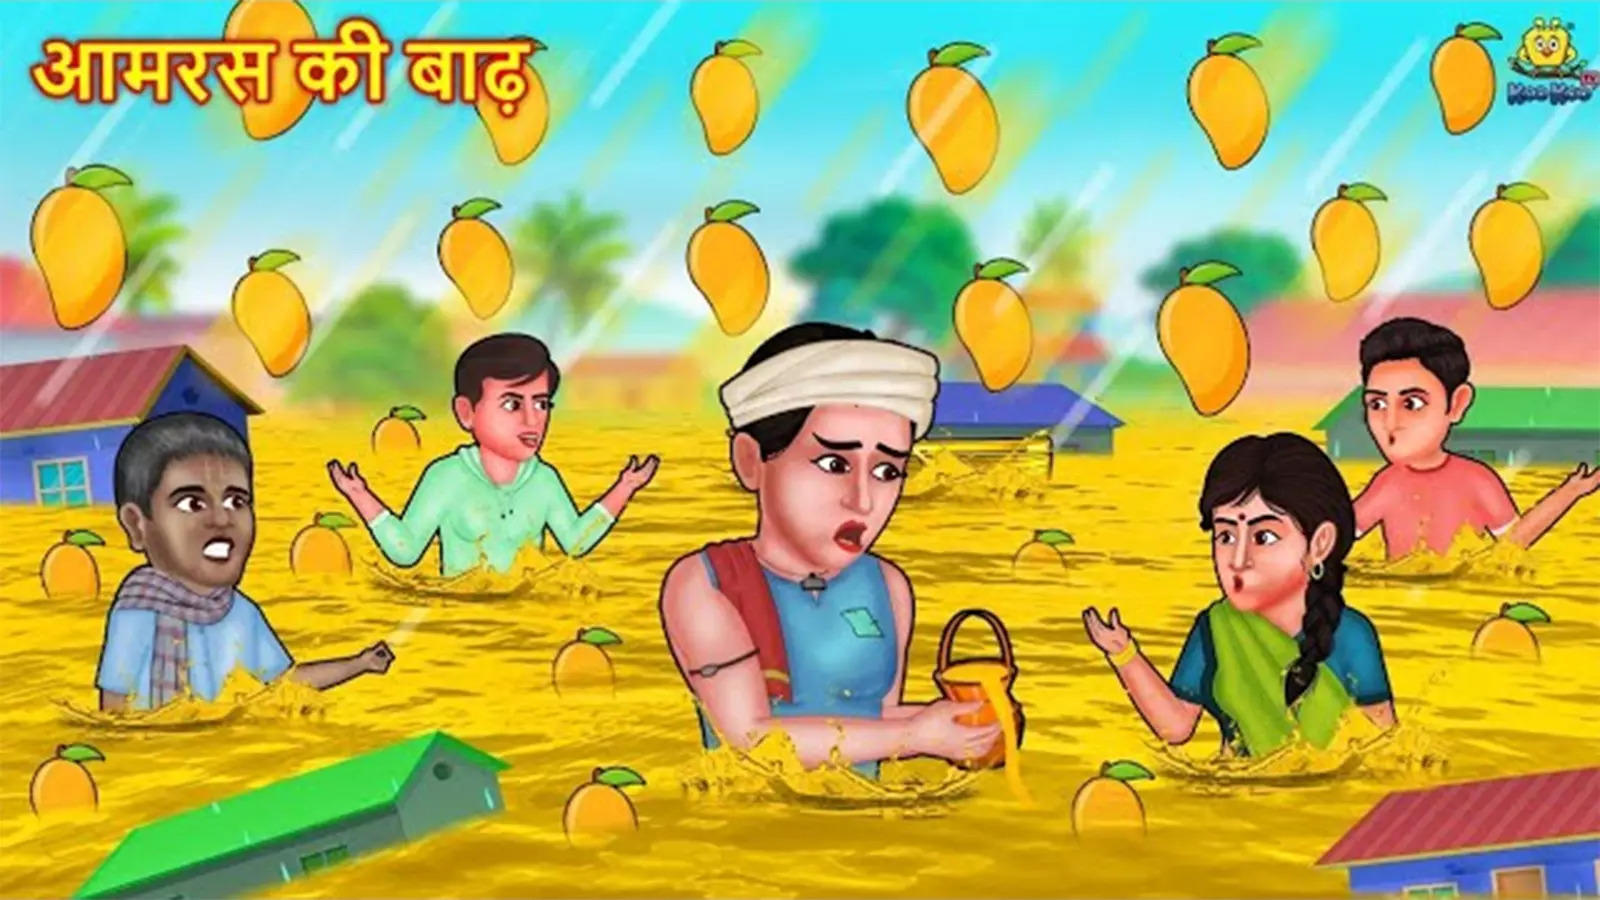 Latest Kids Hindi Story 'Aamras Ki Baadh' For Kids - Check Out Children's  Nursery Rhymes, Baby Songs, Fairy Tales And Many More In Hindi |  Entertainment - Times of India Videos